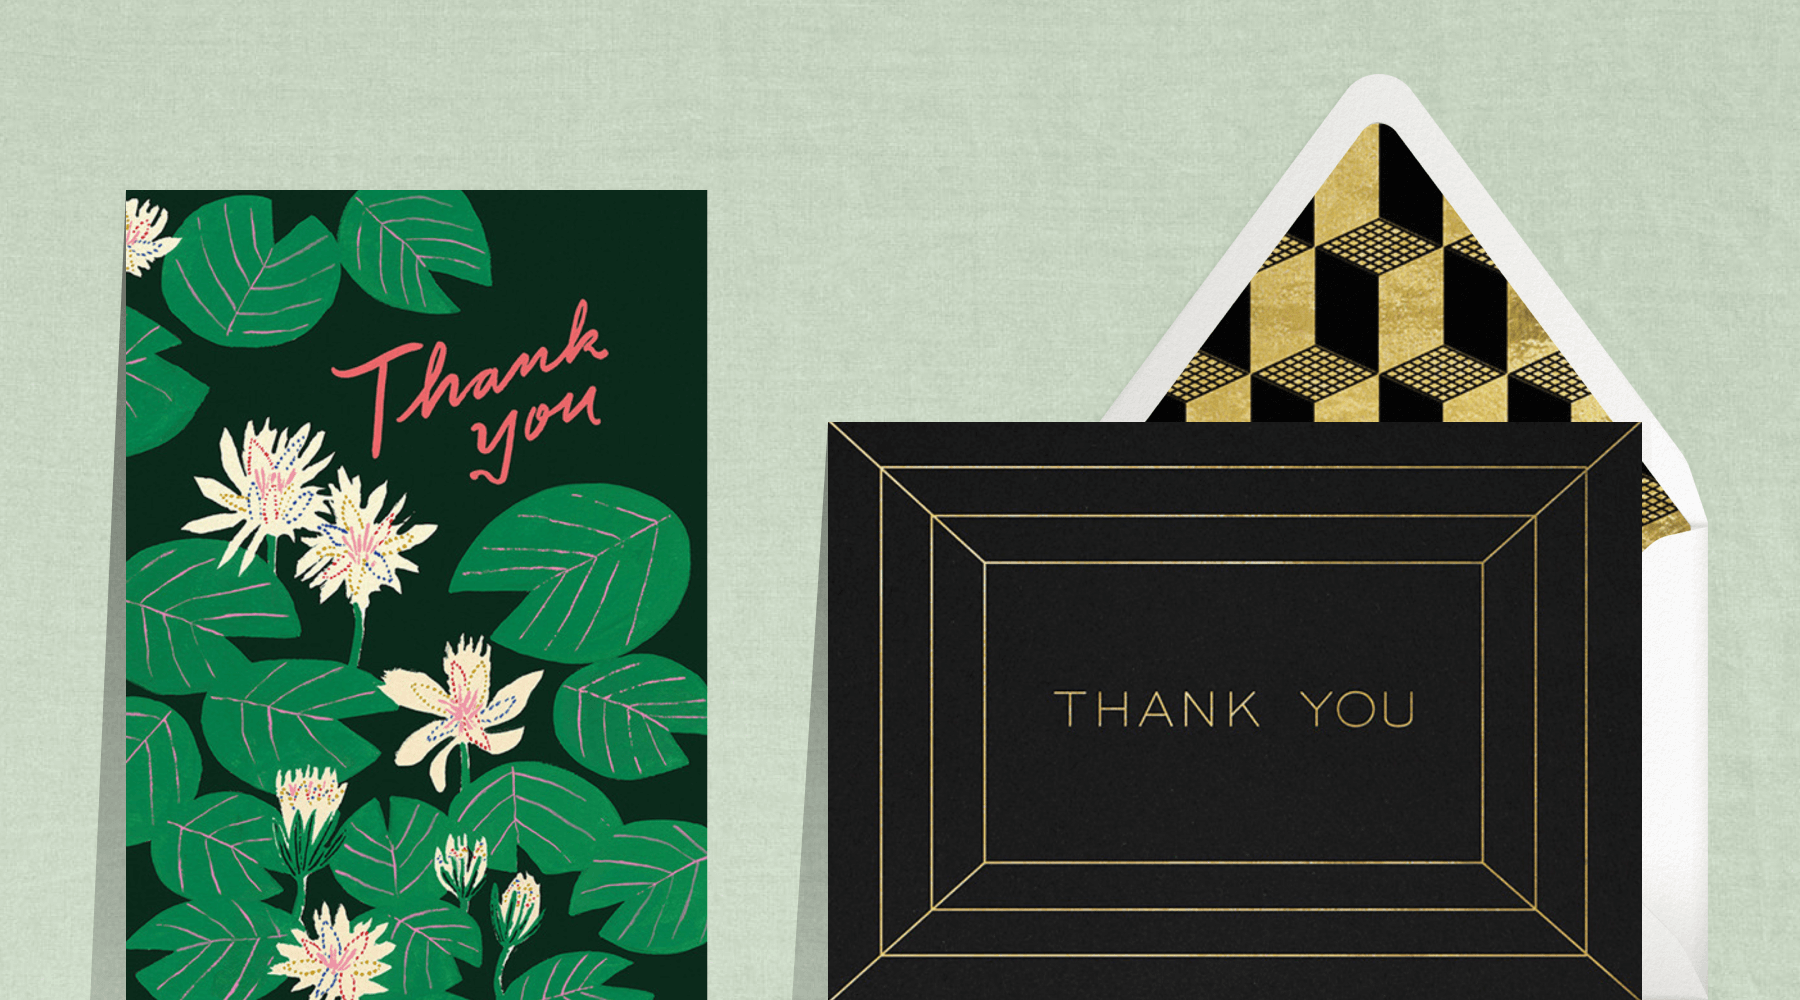 Two thank you cards side by side.